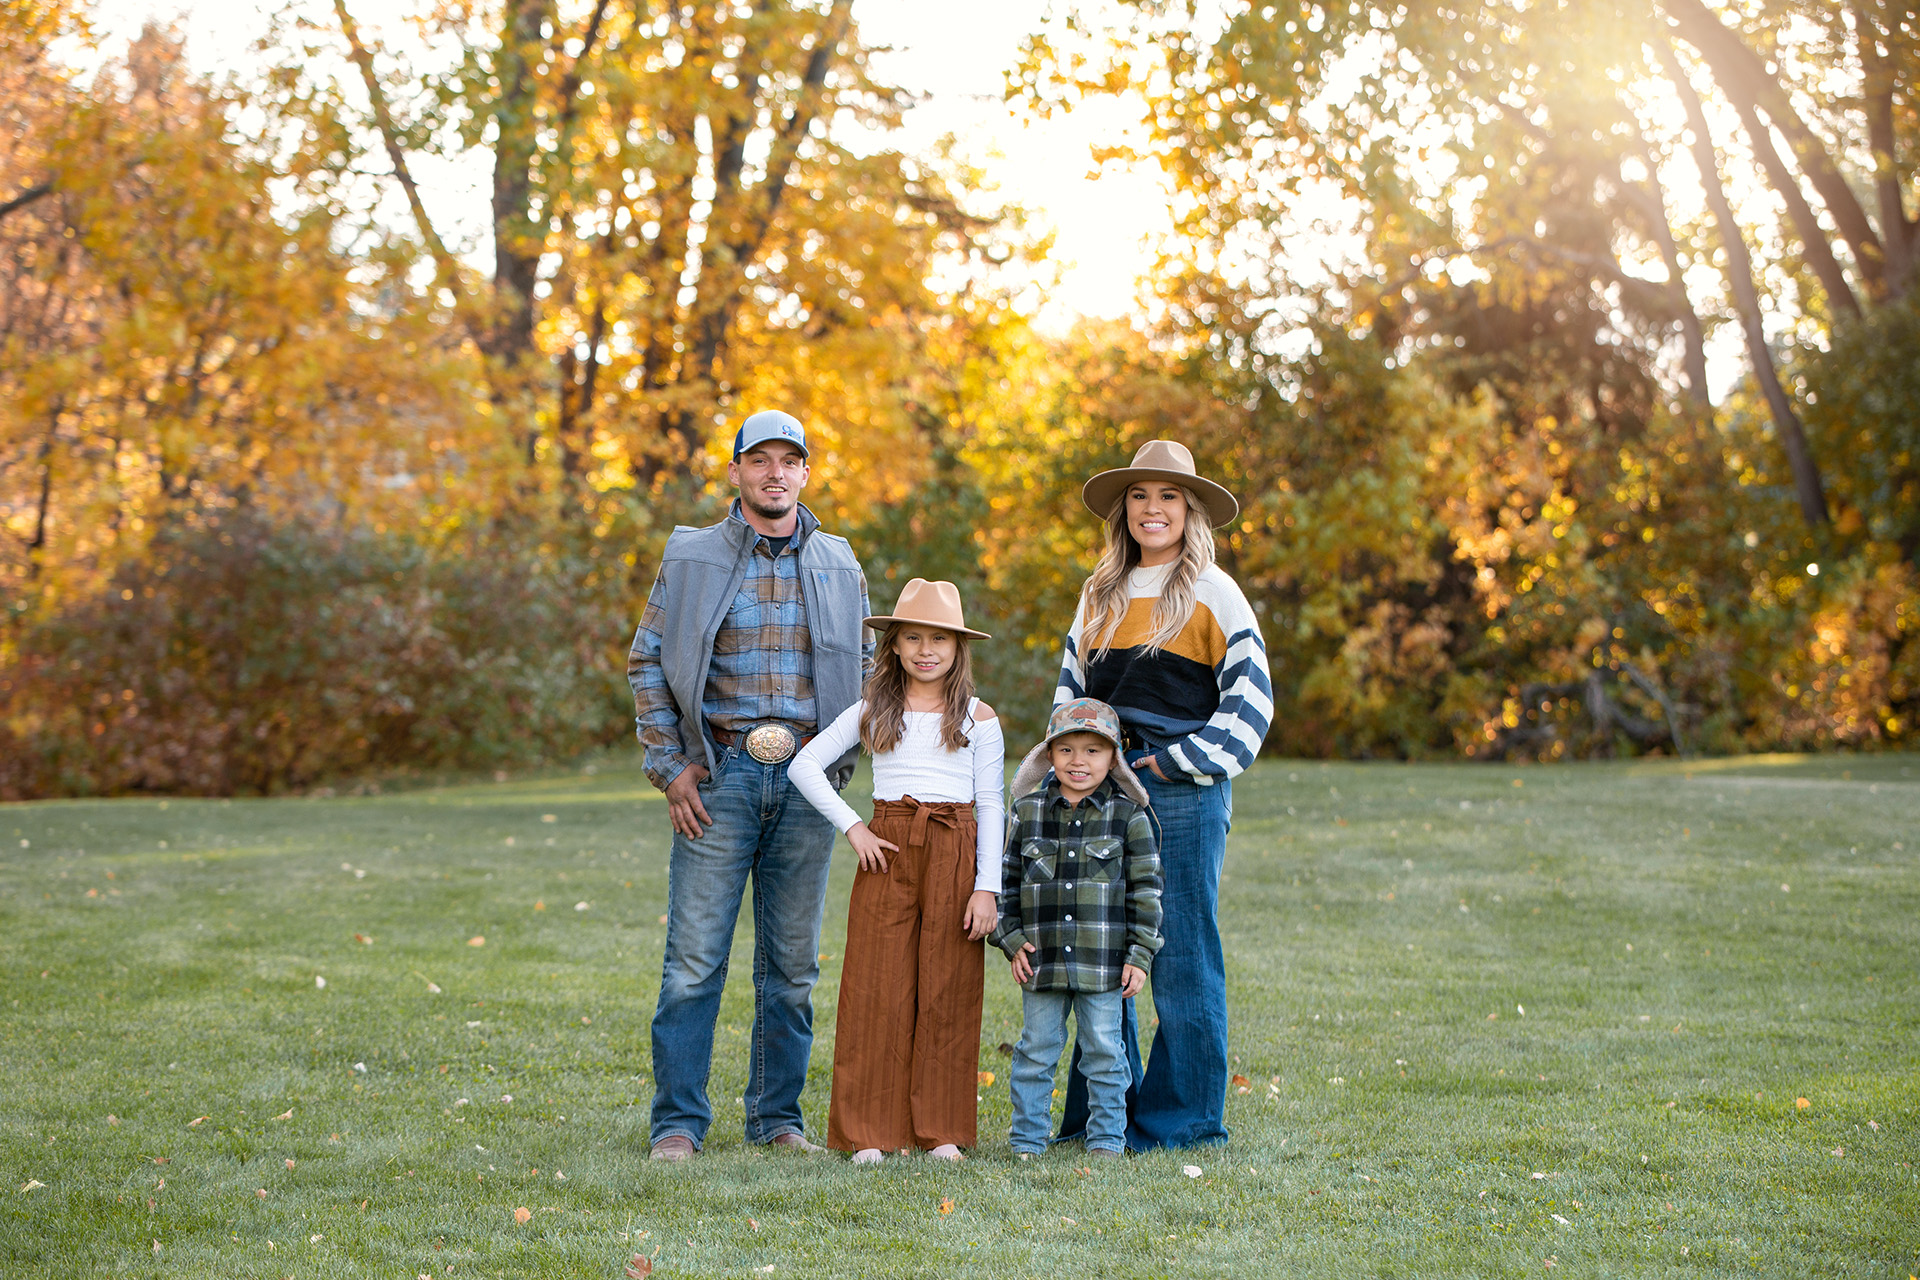 What to wear for family photography session